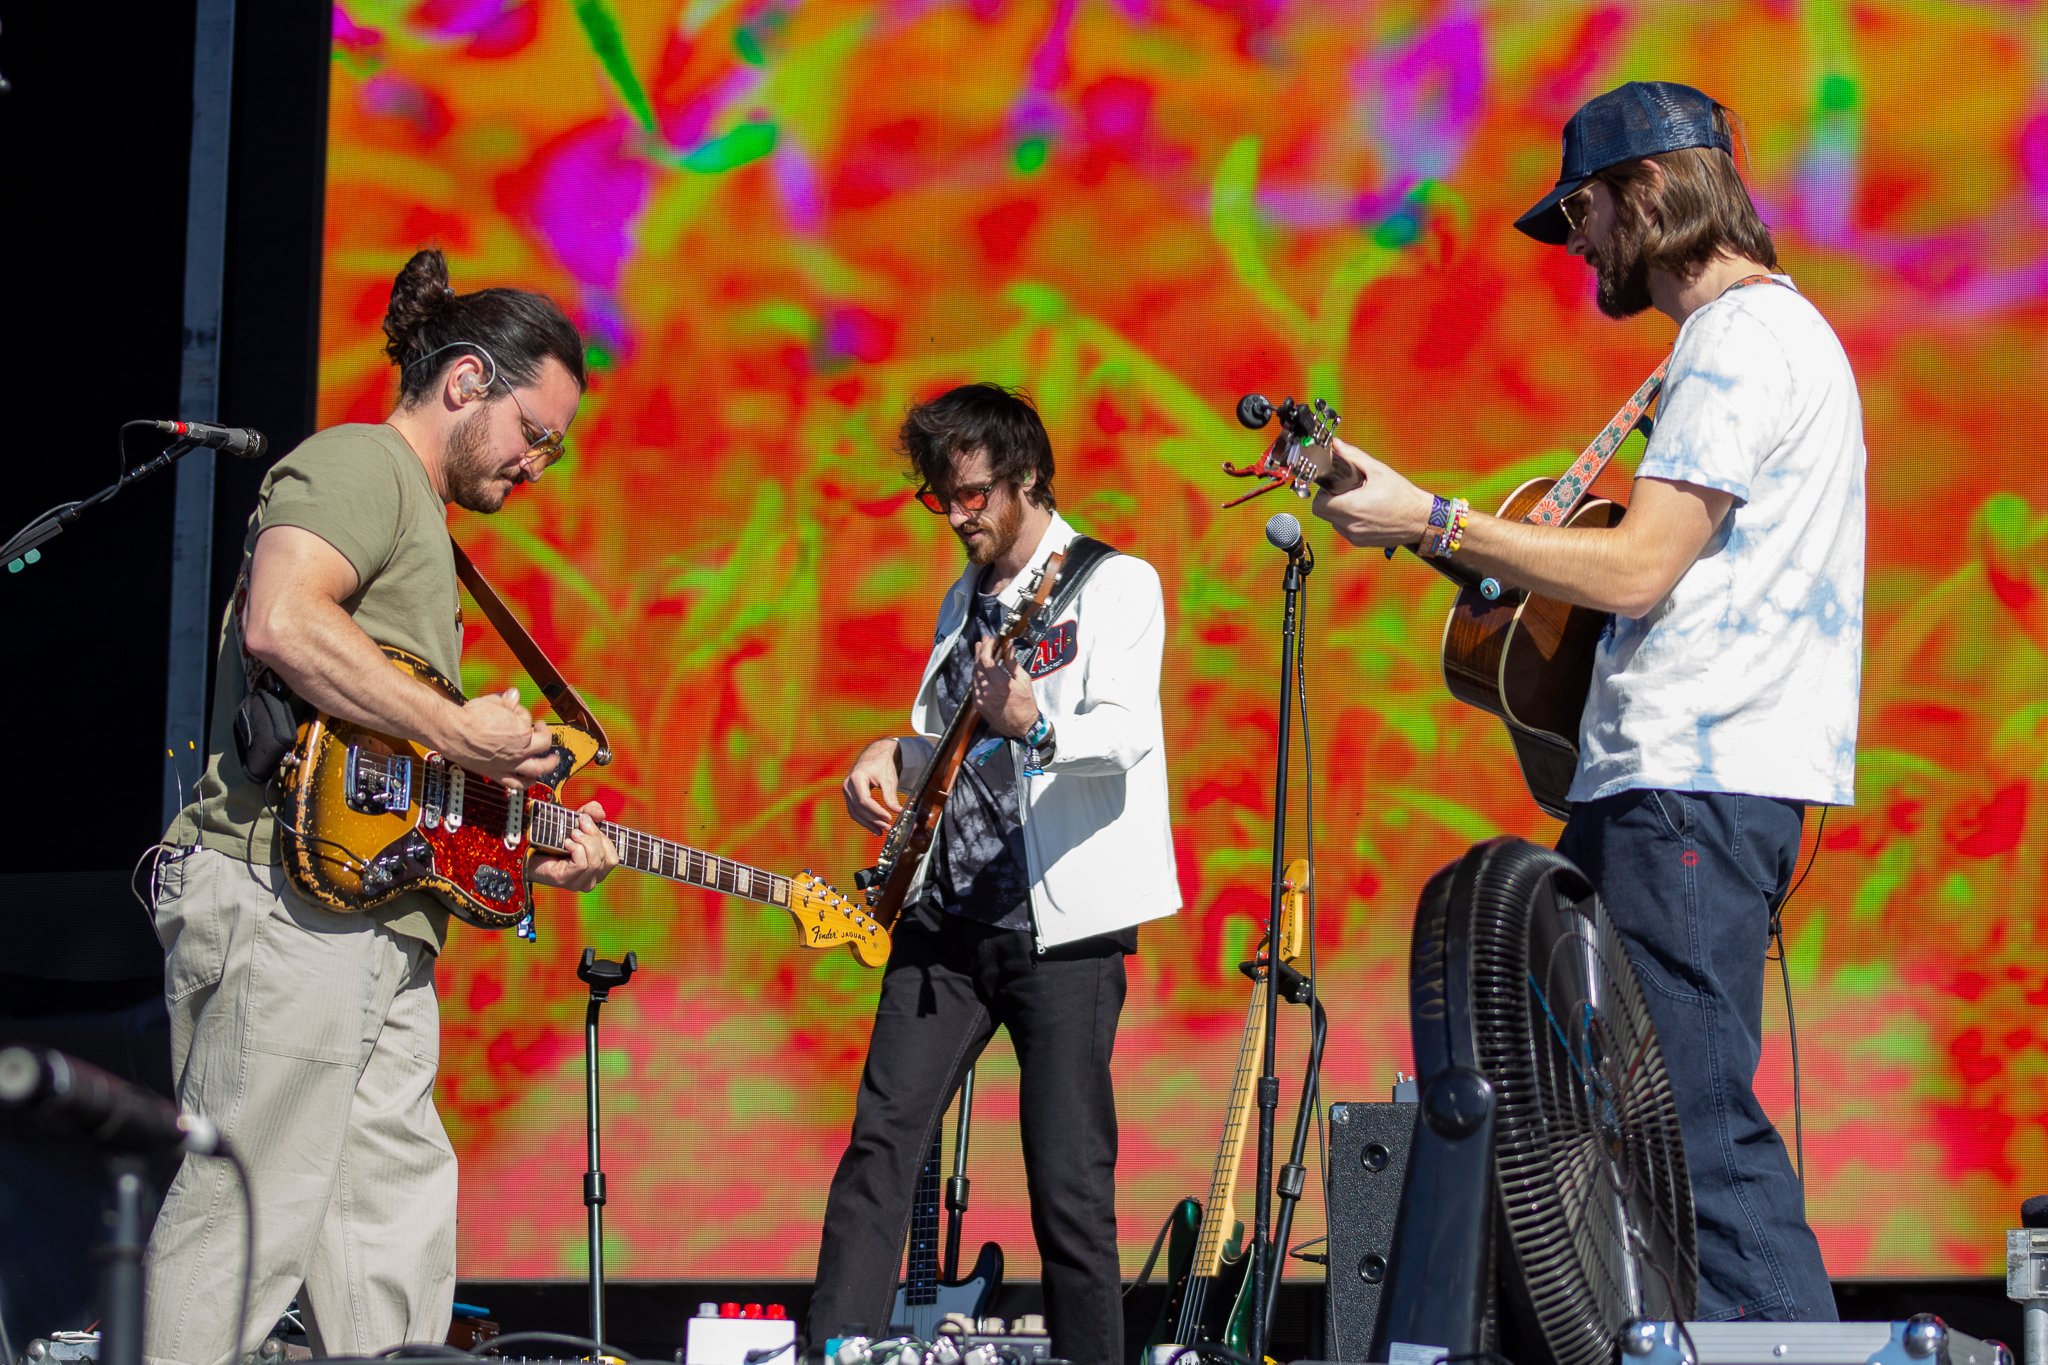  A psychedelic backdrop fills the American Express stage as indie-rock band Mt. Joy performs. 